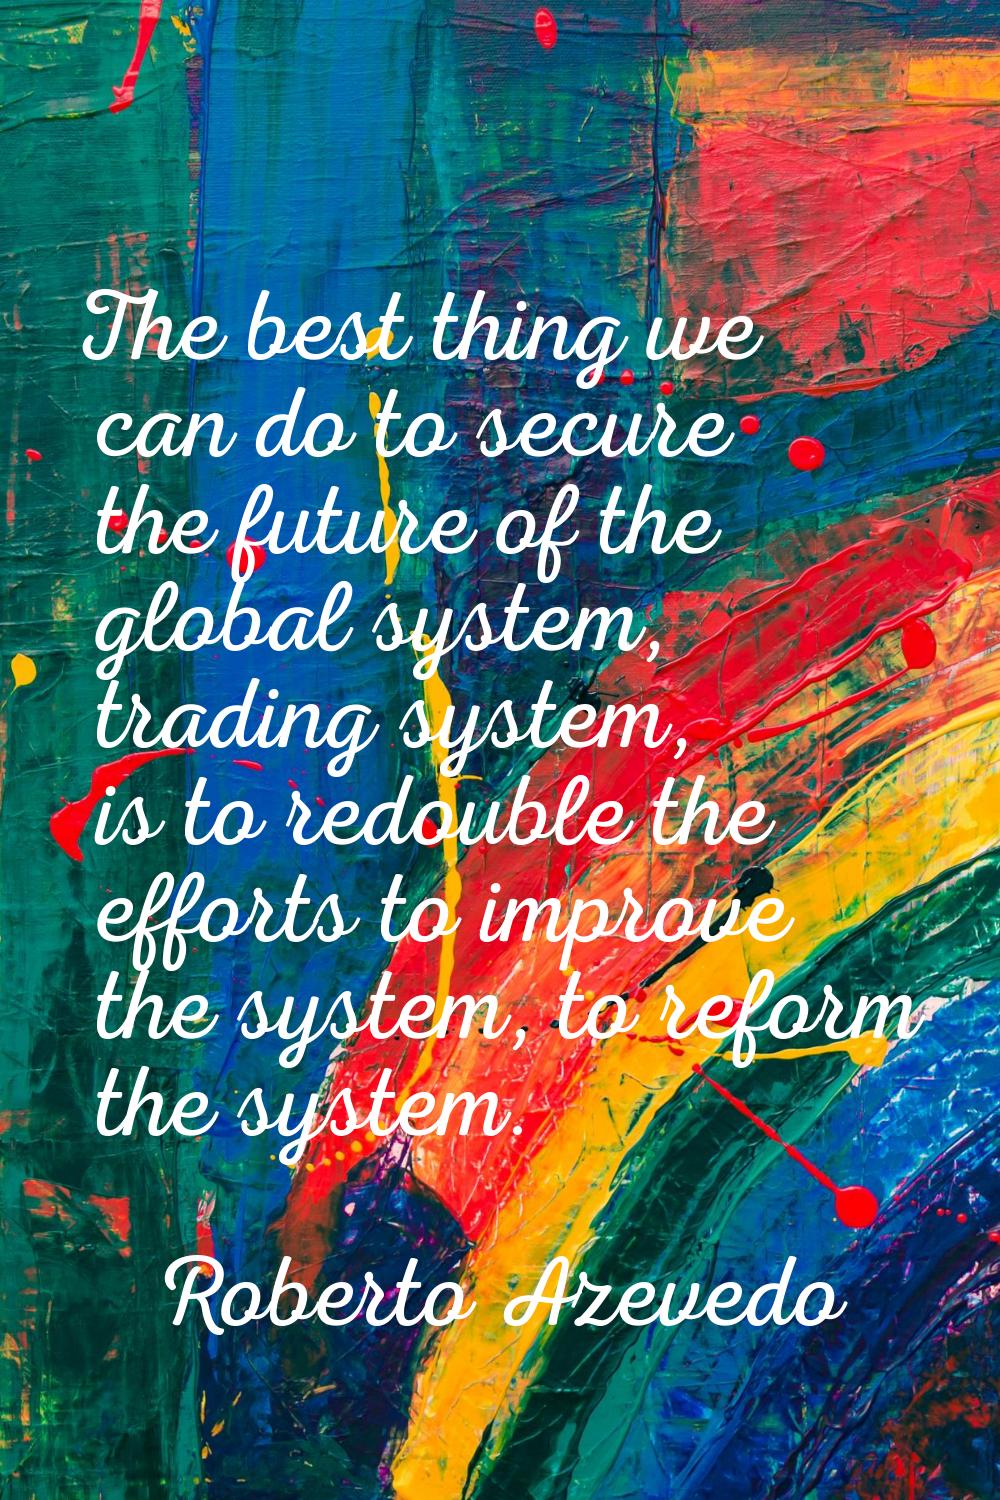 The best thing we can do to secure the future of the global system, trading system, is to redouble 